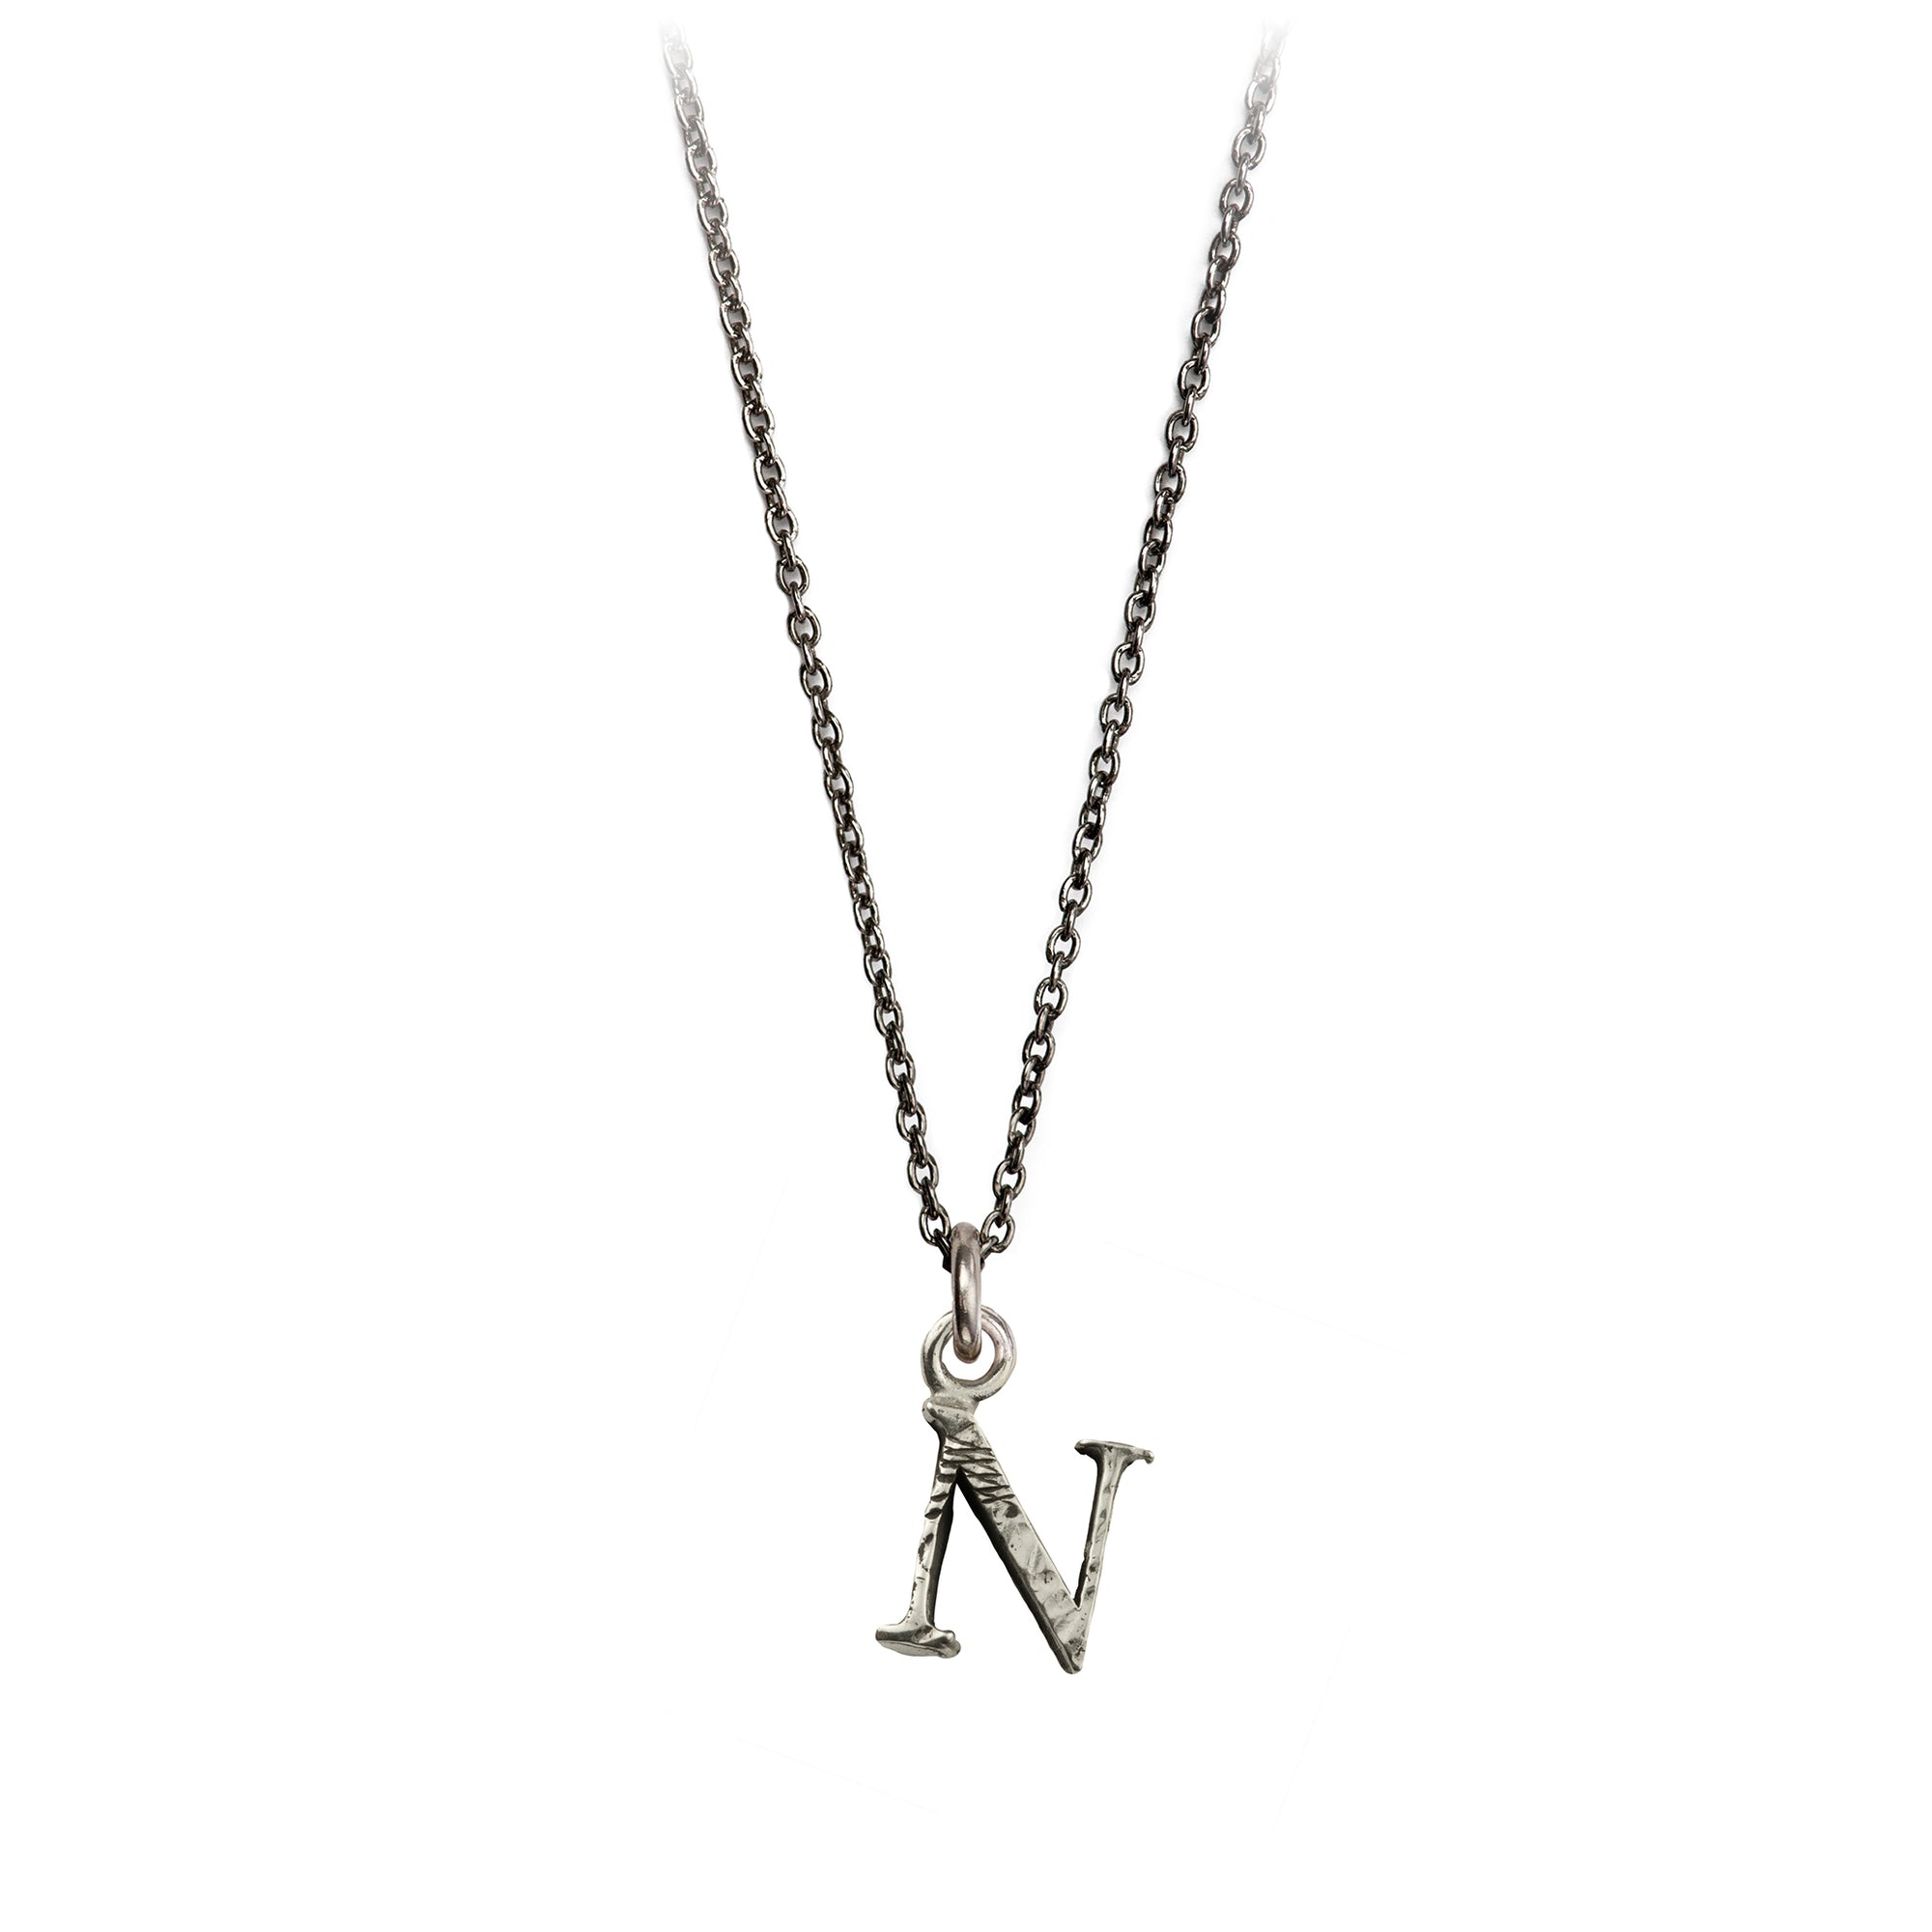 A sterling silver letter "N" charm on a silver chain.